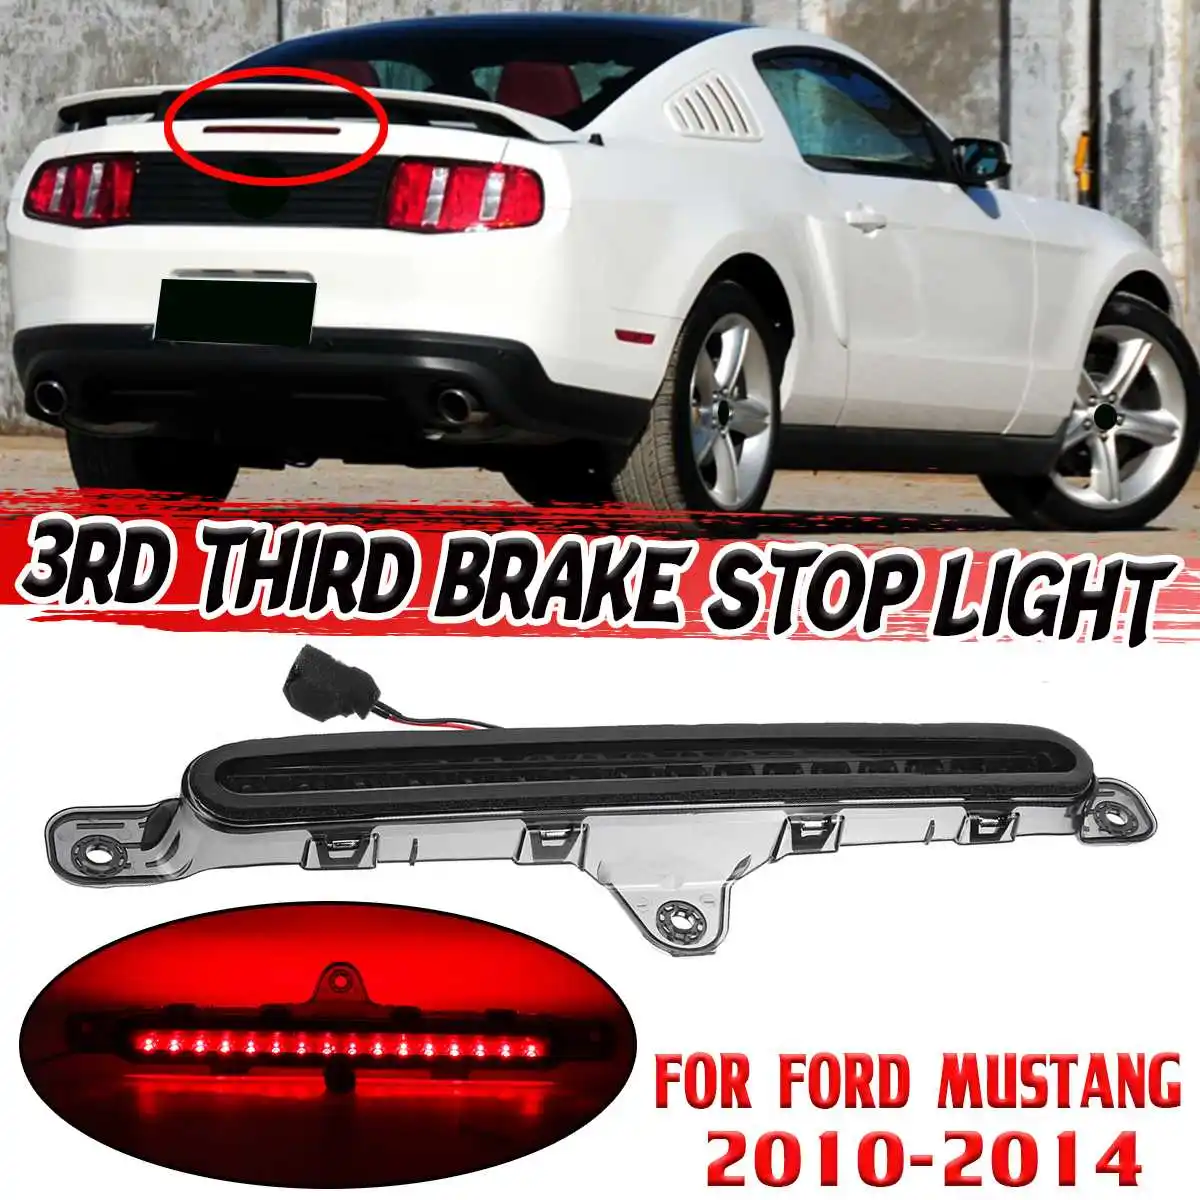 

Red/Smoked Car Rear Tail Light High Mount 3rd Rear Brake Stop Light Additional Brake Light Lamp For Ford For Mustang 2010-2014